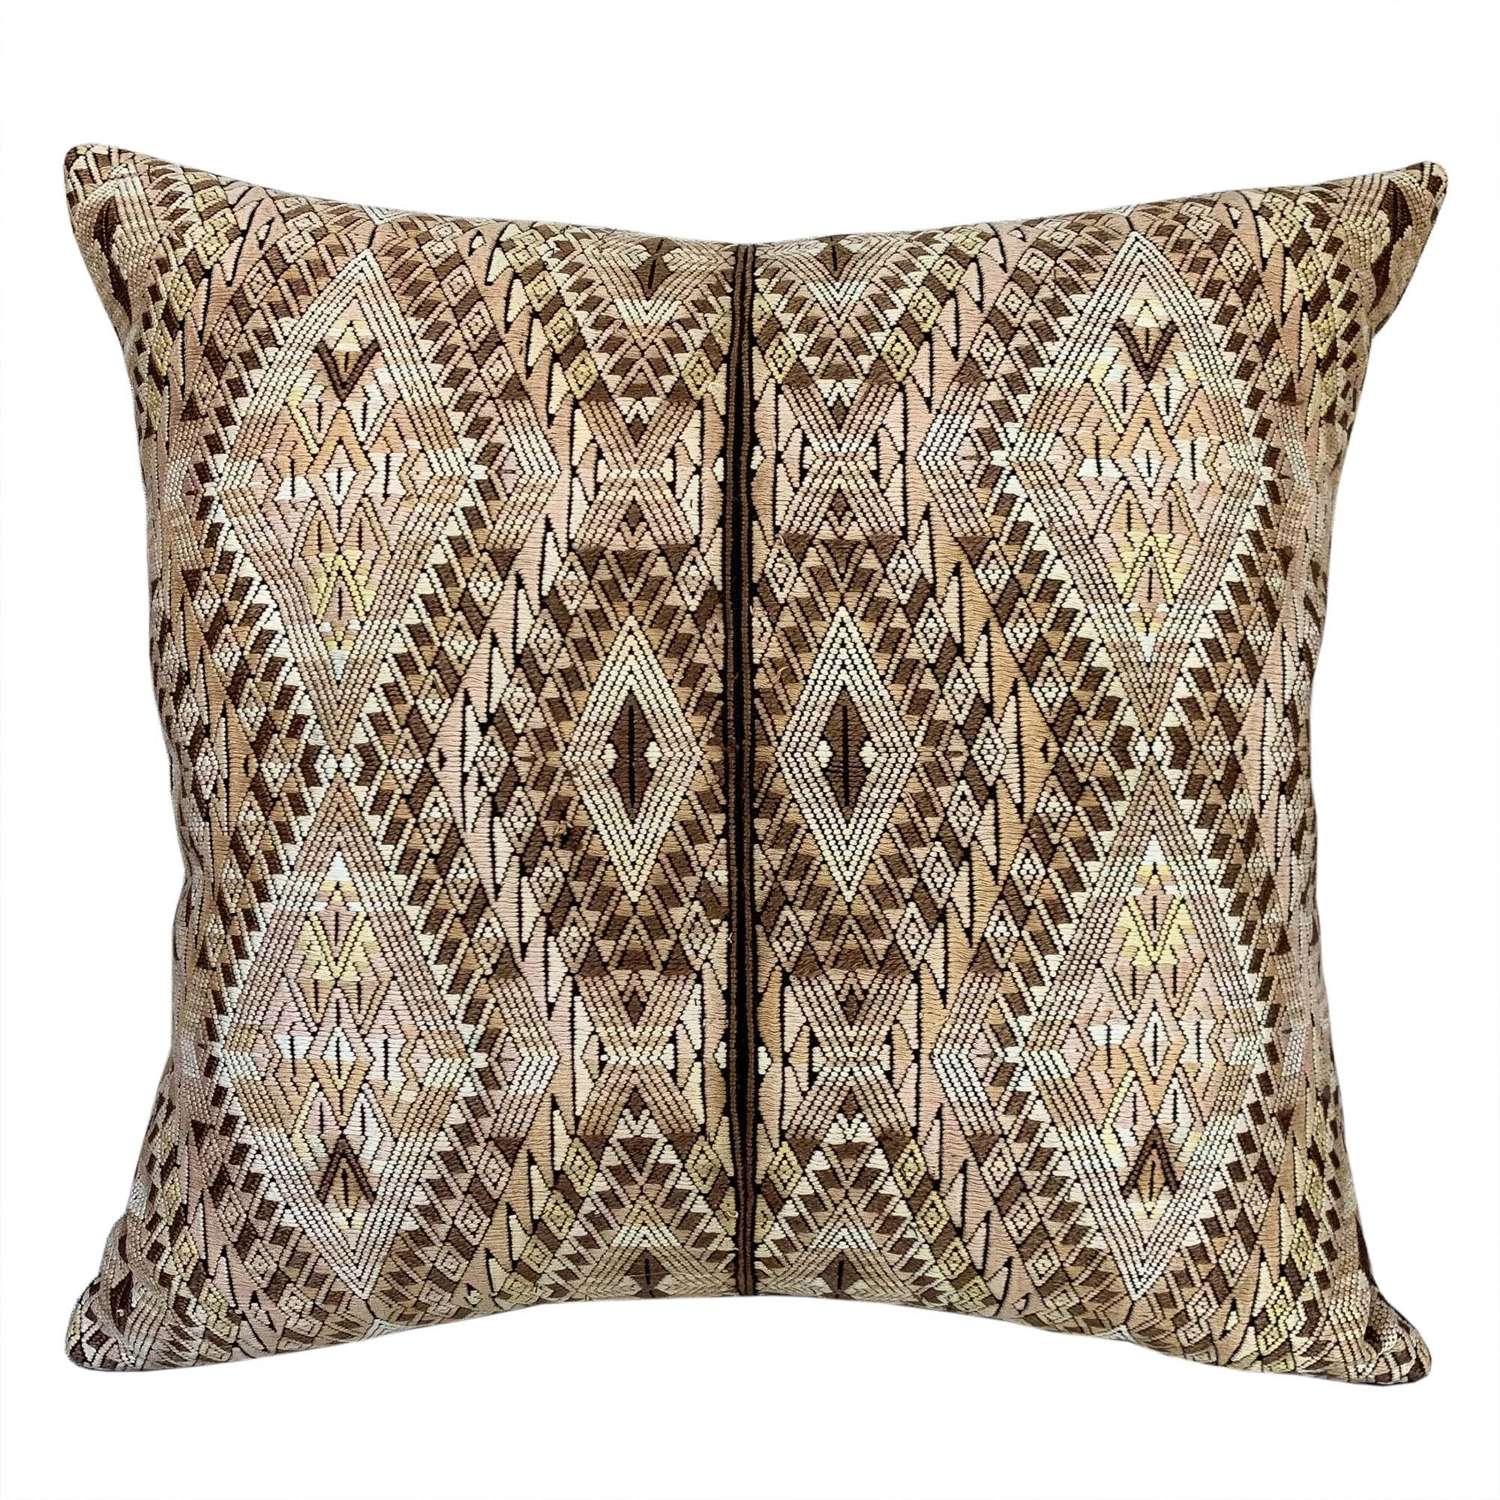 Huipil cushion, brown and beige